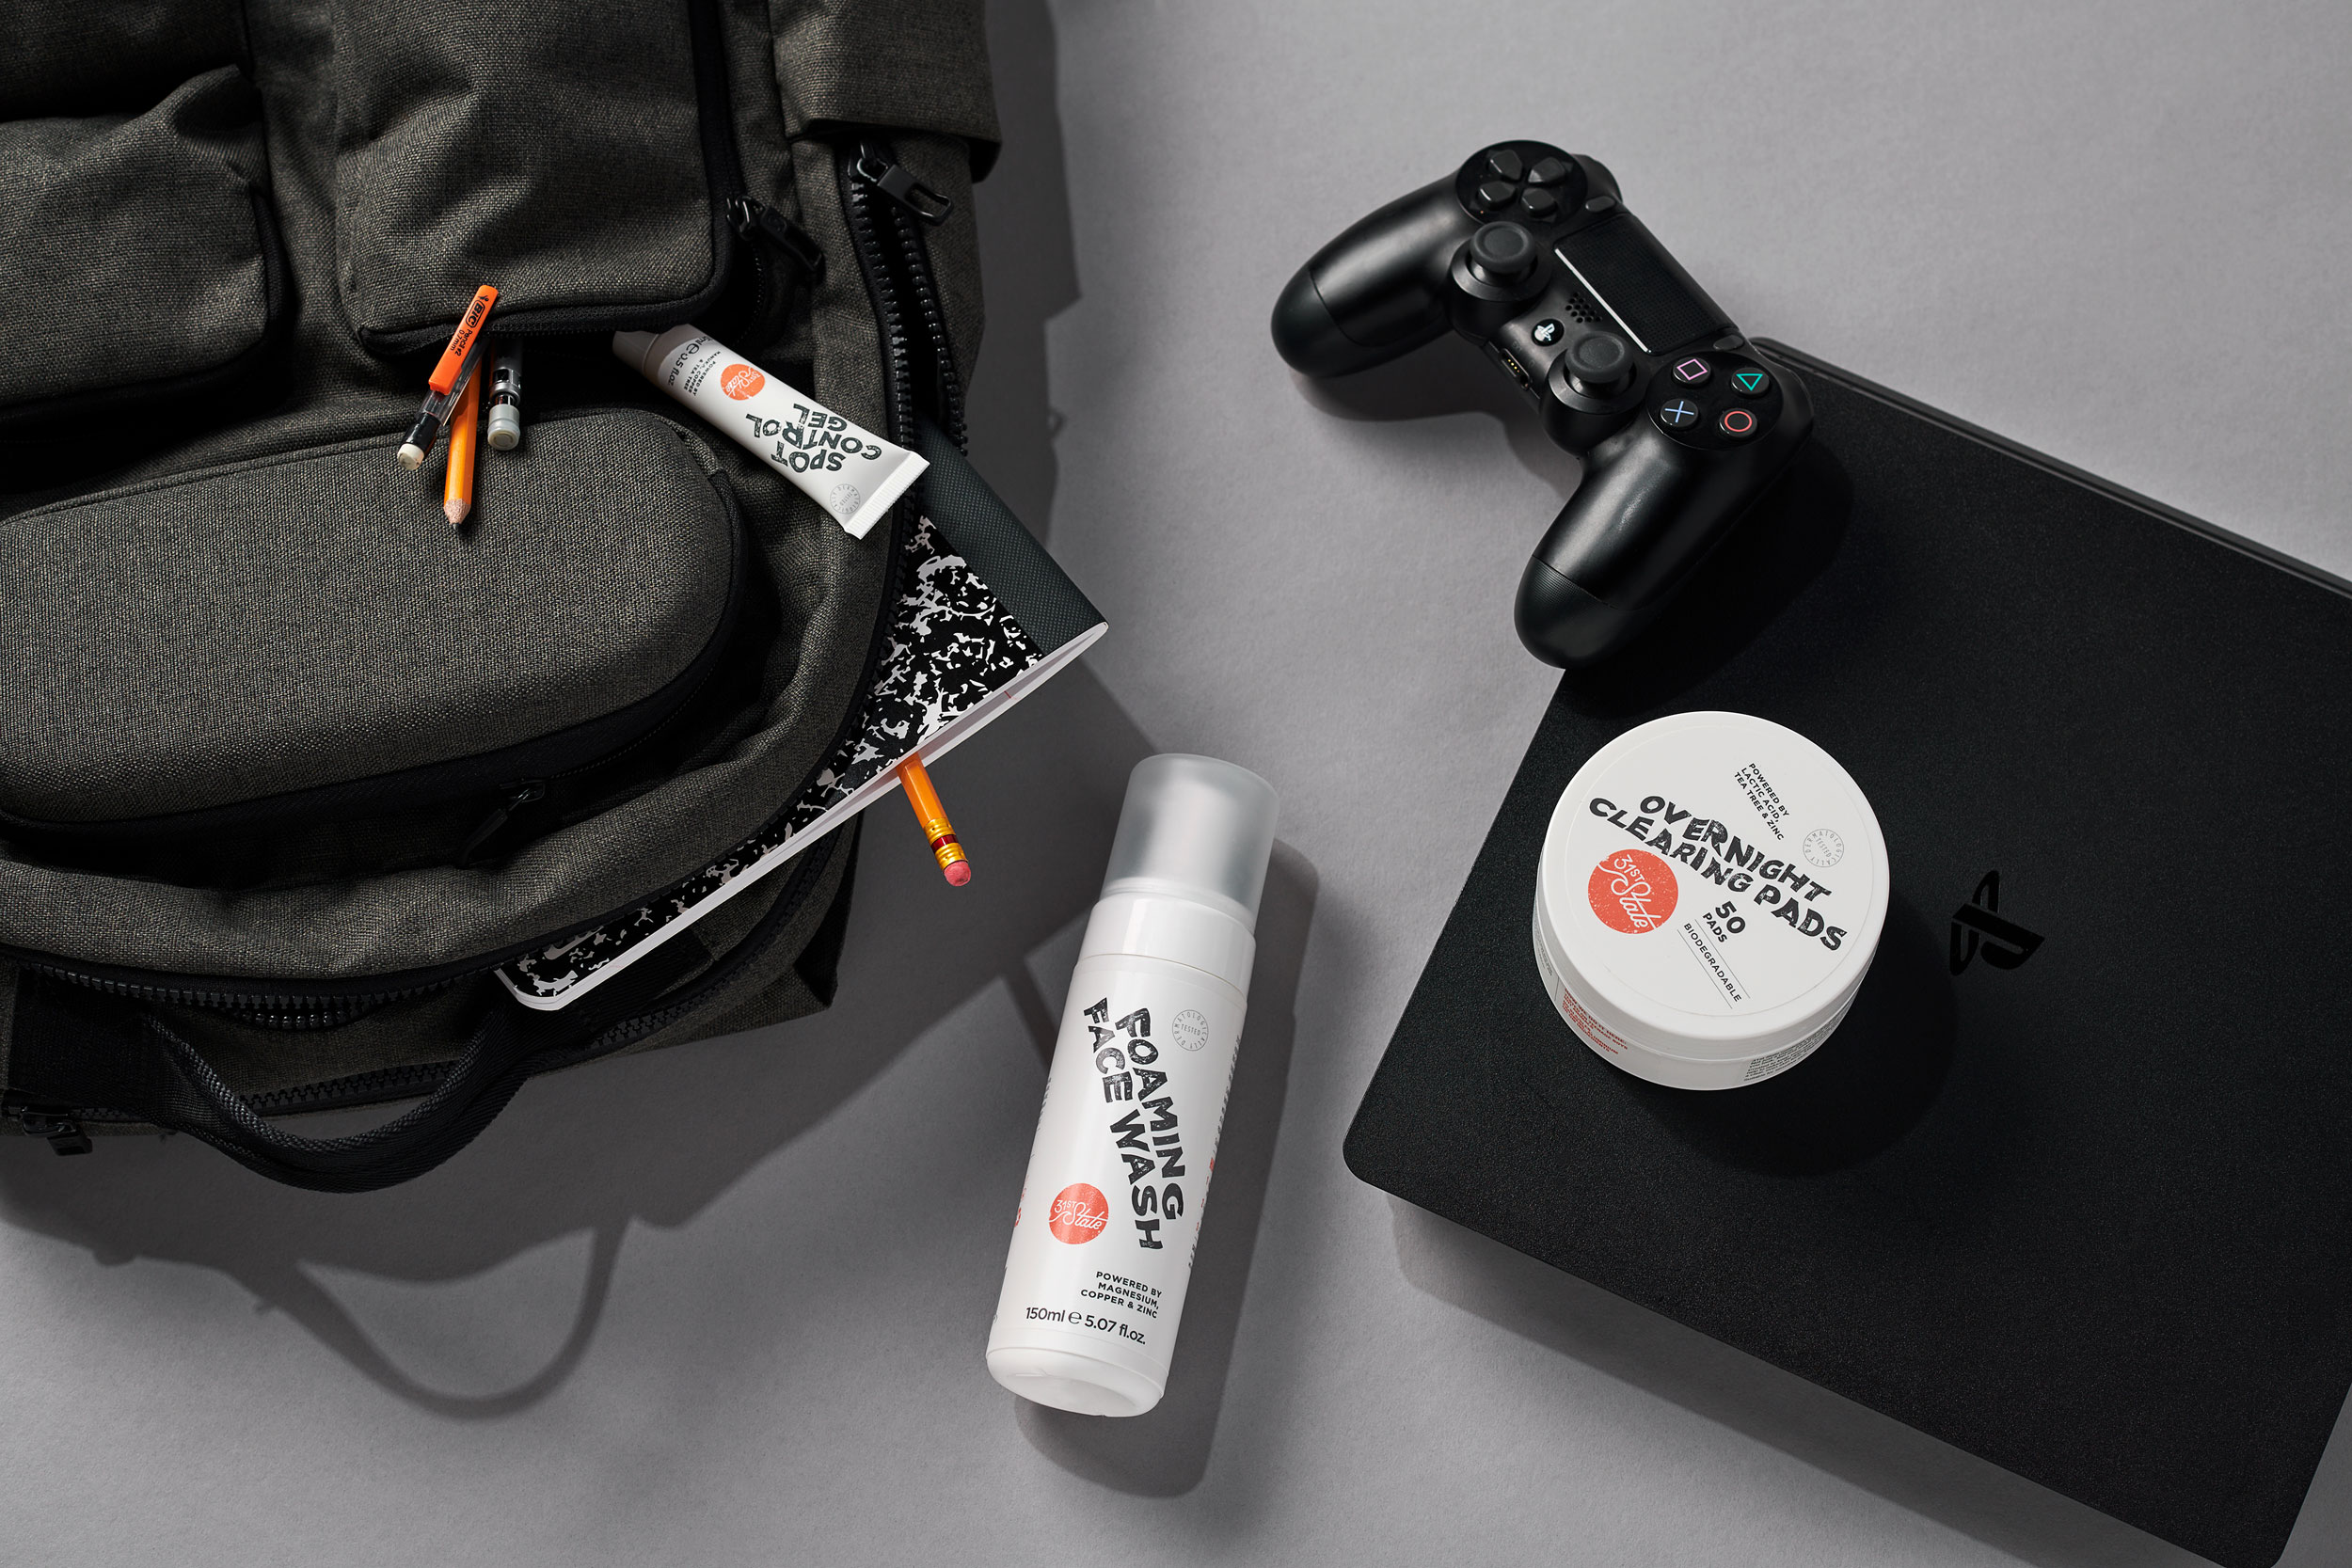 Lifestyle image displaying skin care products amongst backpack, school supplies and game console